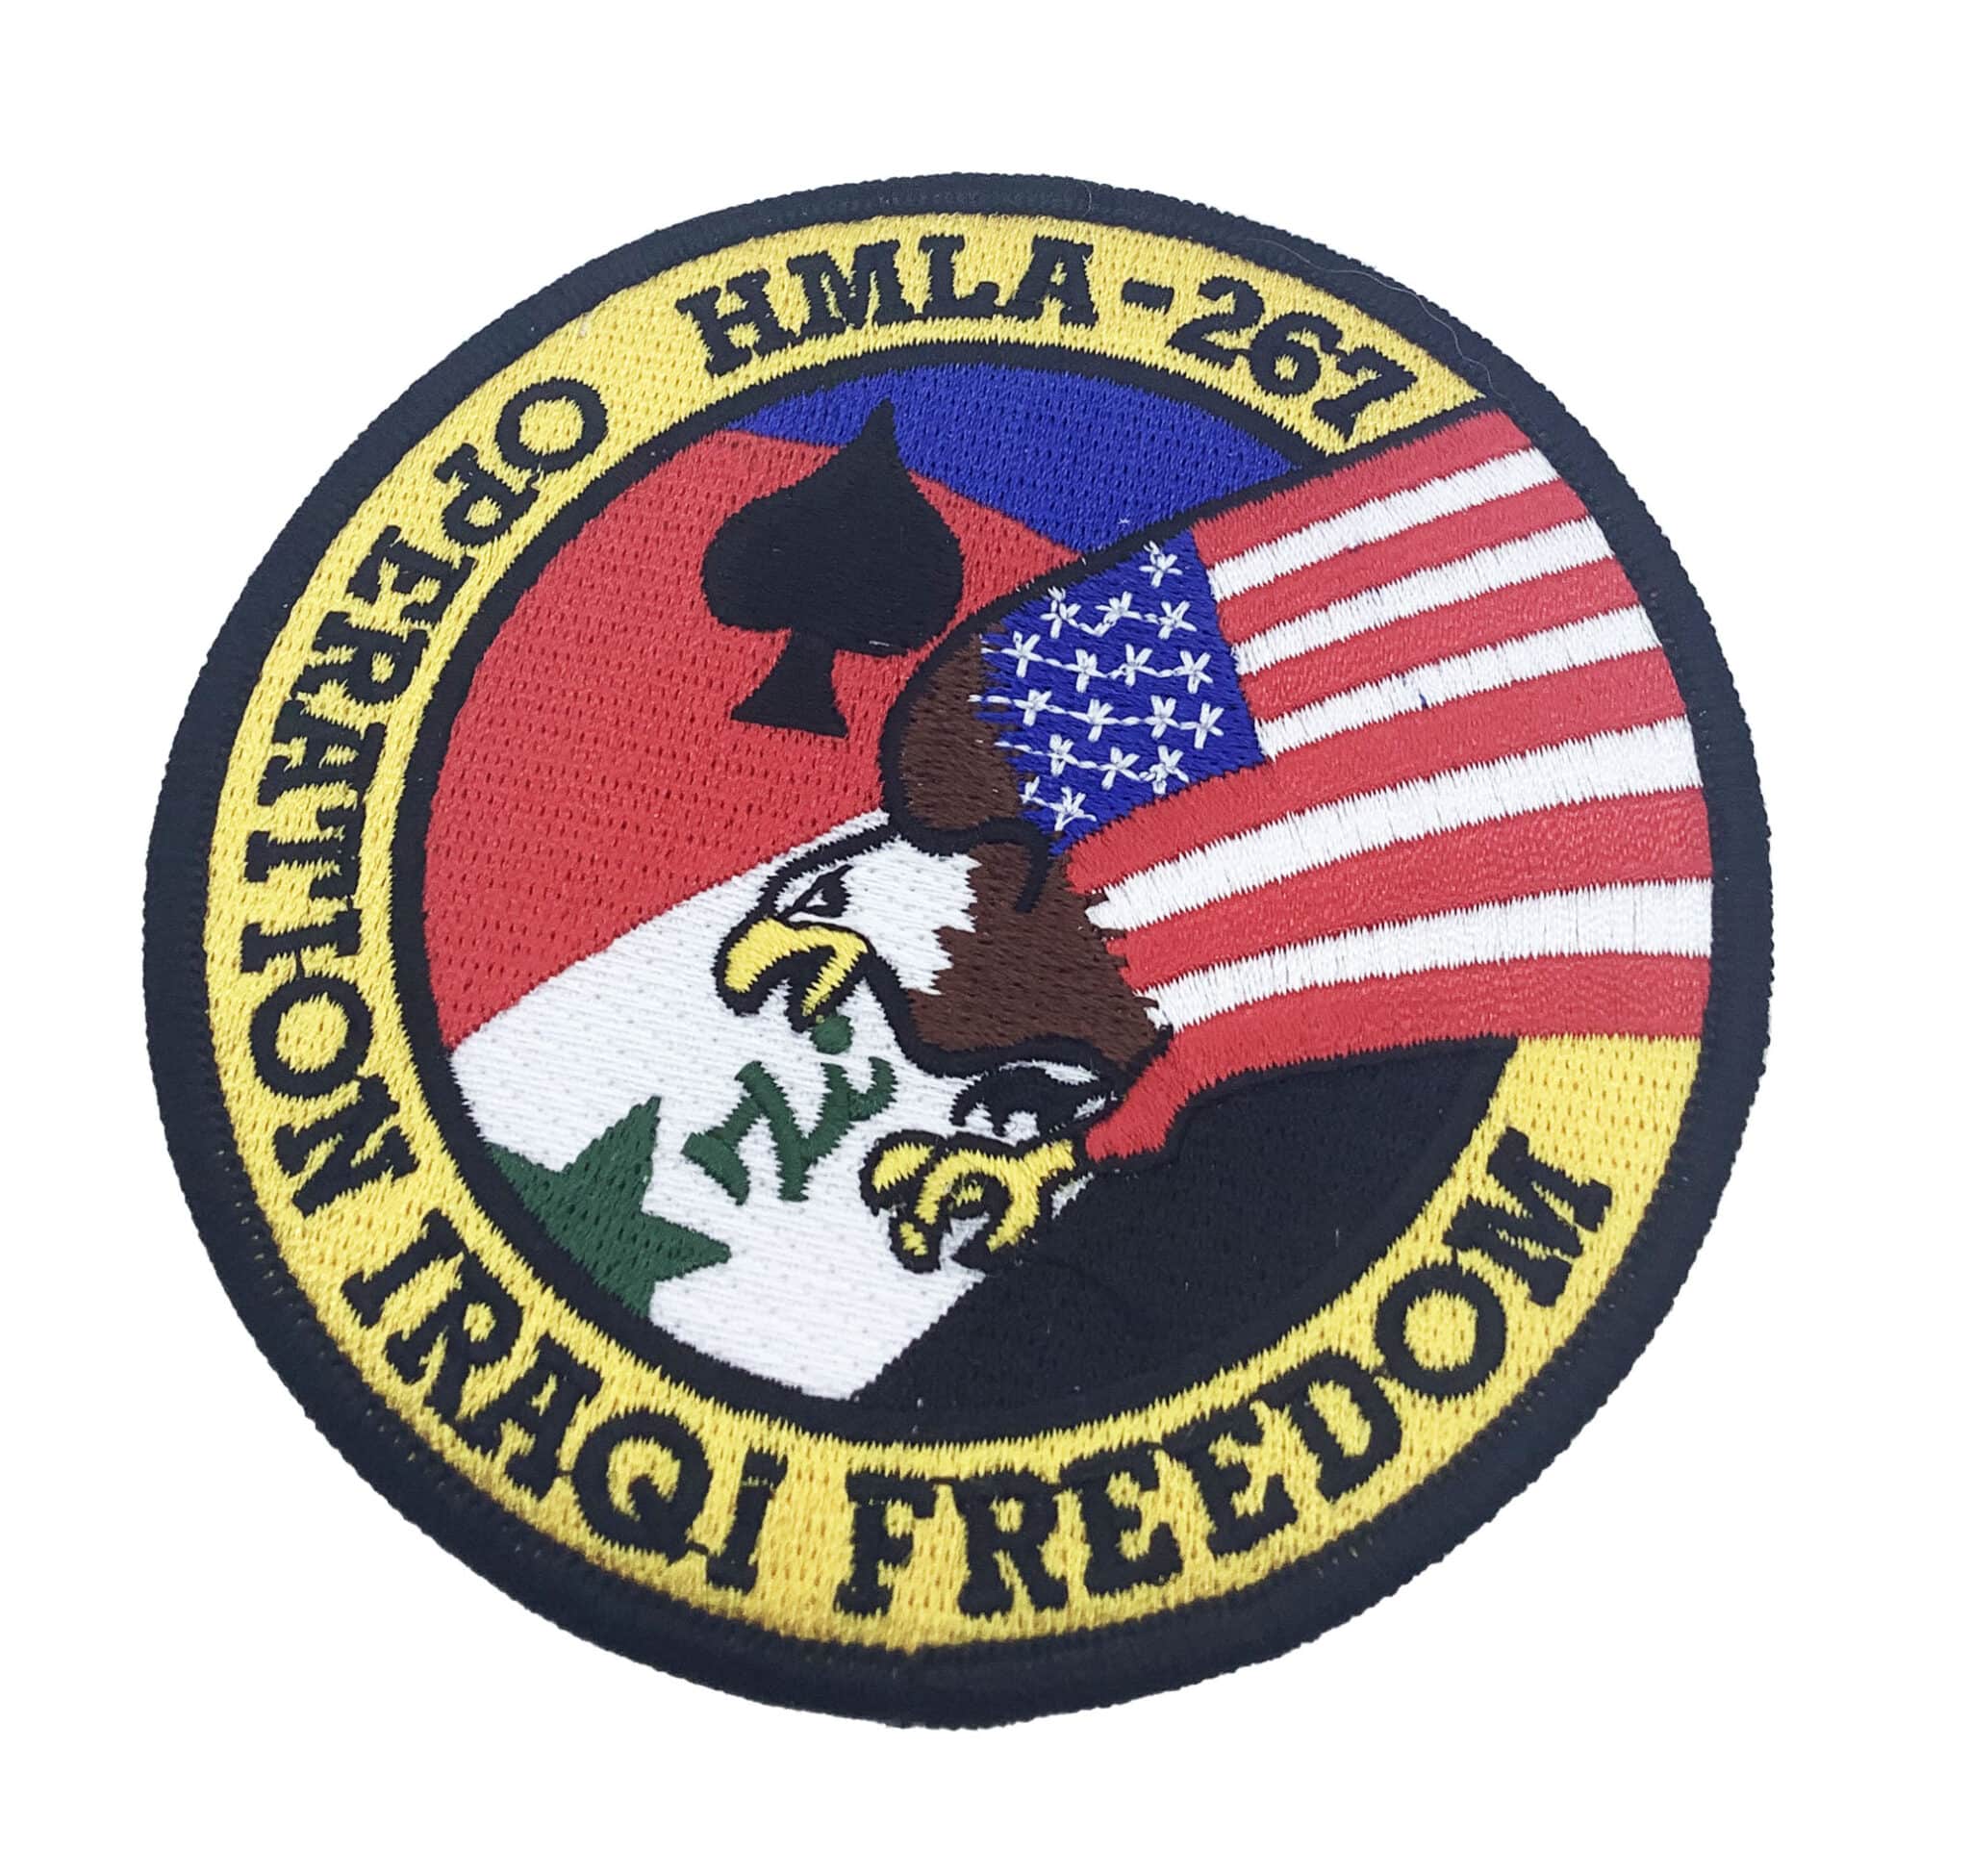 HMLA-267 OIF Patch – No Hook and Loop